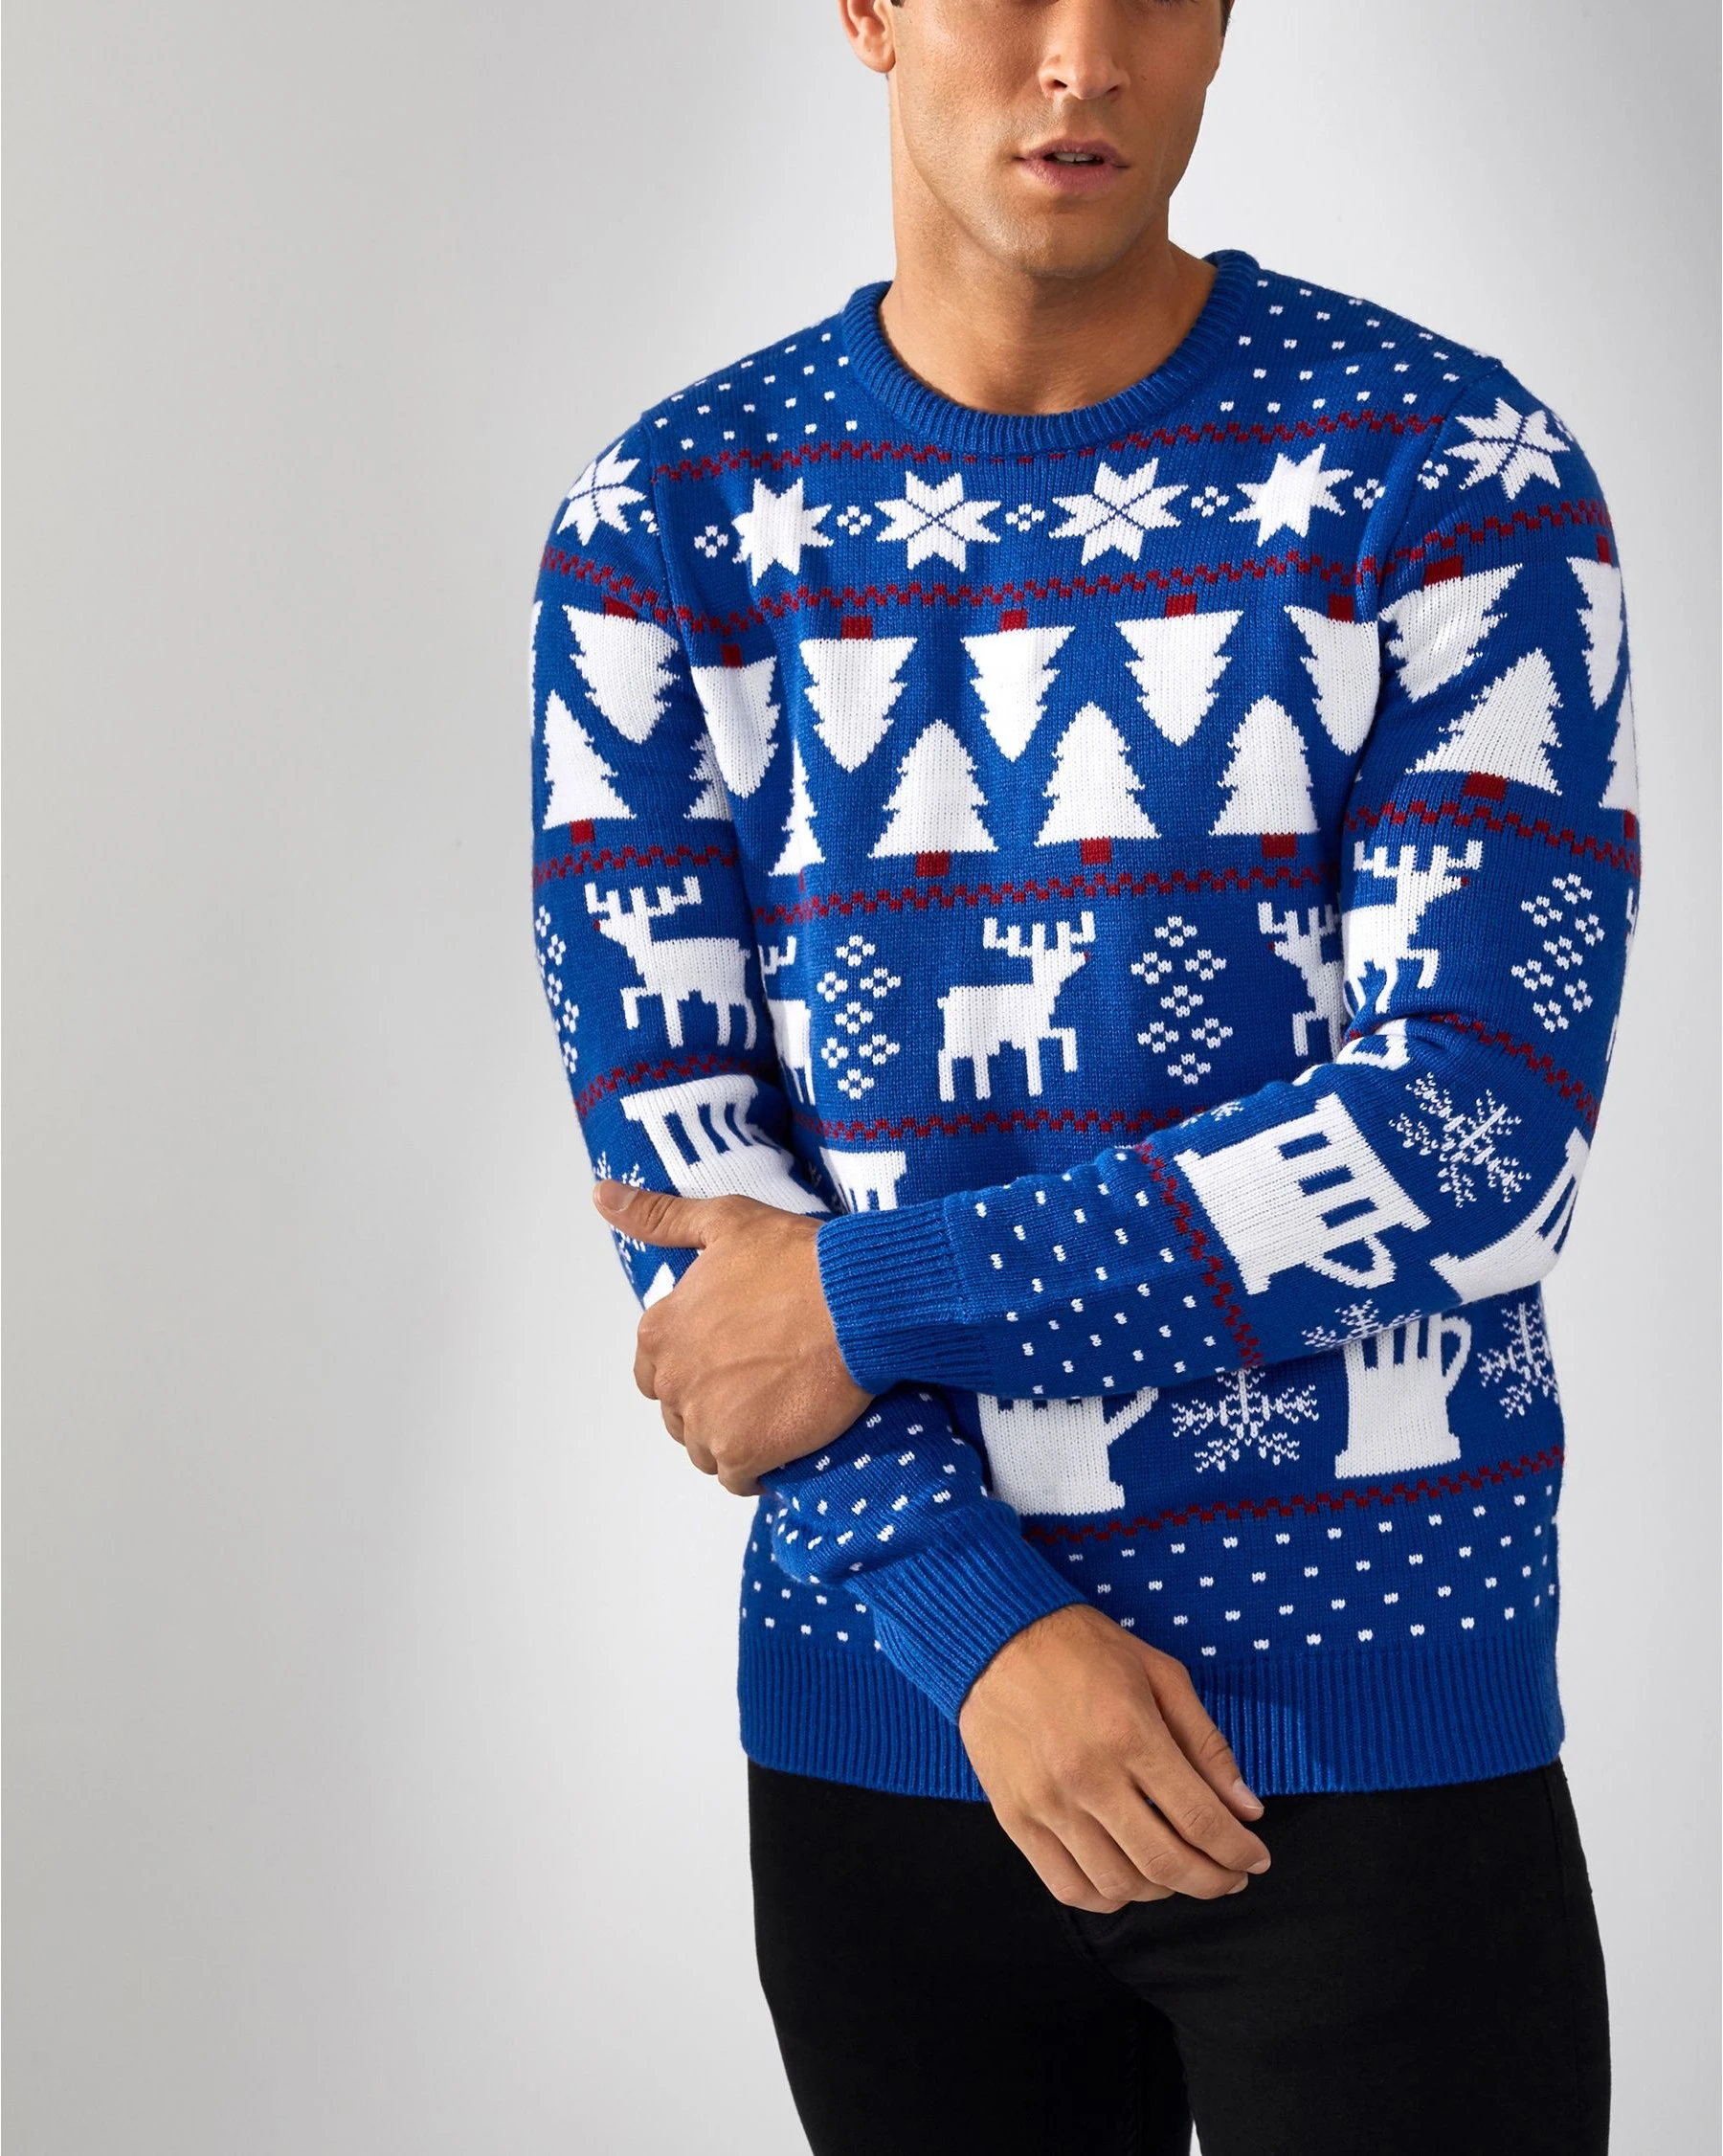 Wholesale Men Knitted Sweater Christmas Sweater Ugly Blue Buy Men Christmas Sweater Christmas